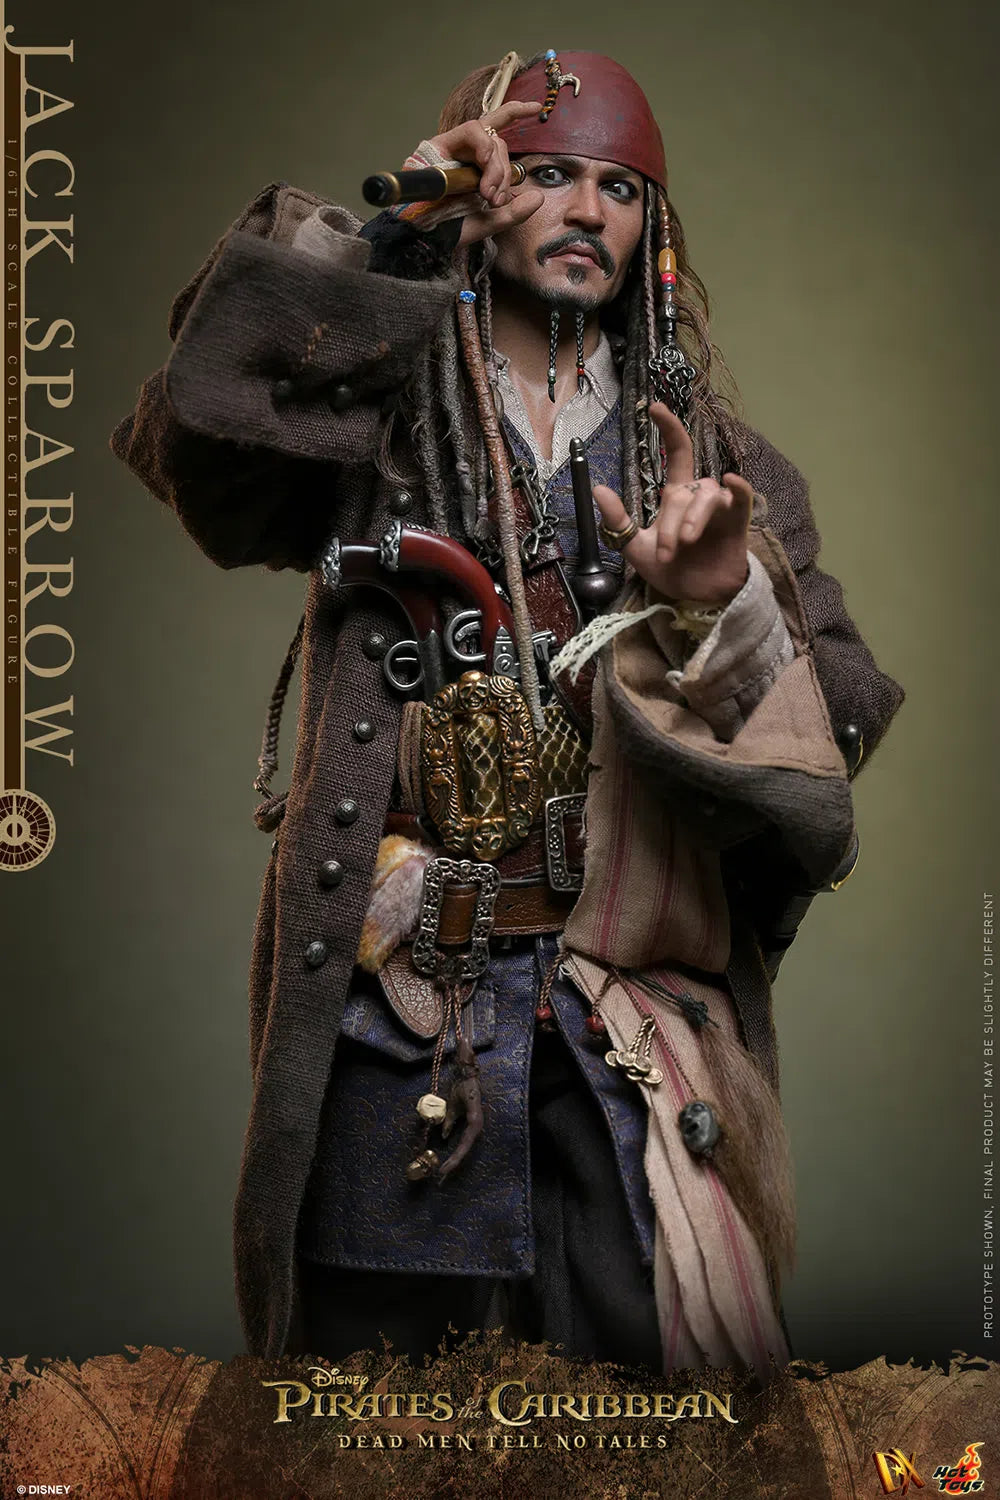 Jack Sparrow: Pirates Of The Caribbean: Dead Men Tell No Tales: Standard: Sixth Scale: DX37 Hot Toys